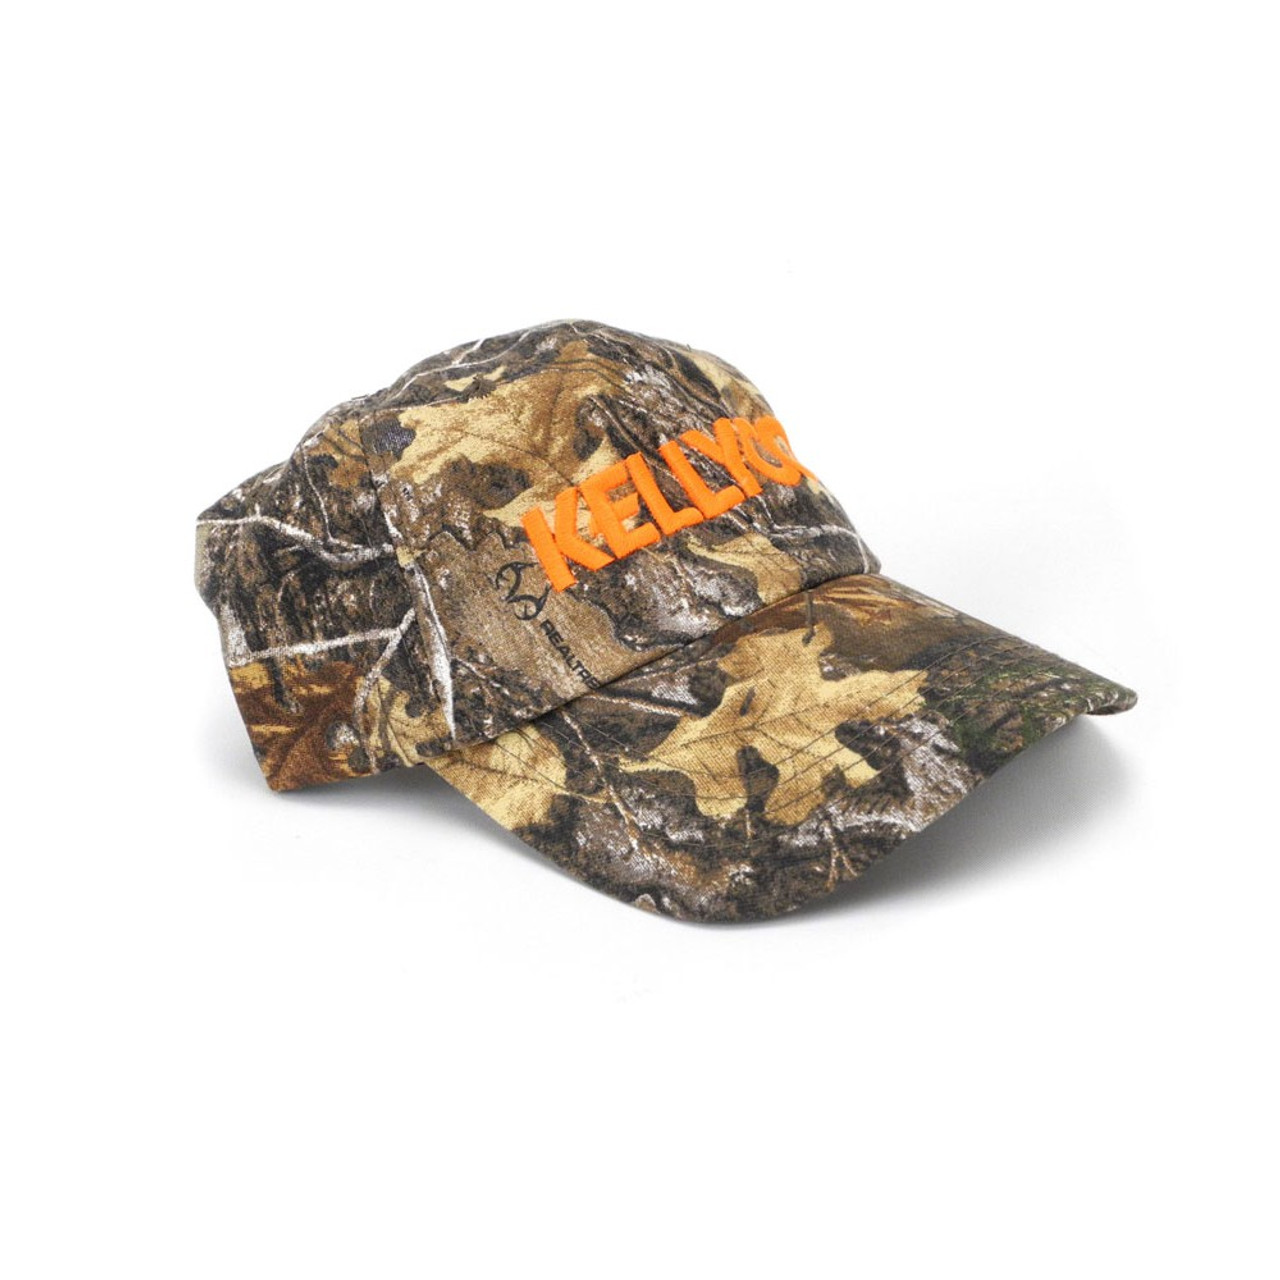 https://cdn11.bigcommerce.com/s-cbw1yp8xth/images/stencil/1280x1280/products/817/2455/kellyco_logo_realtree_cammo_hat00000_1000px__22688.1676487447.jpg?c=1